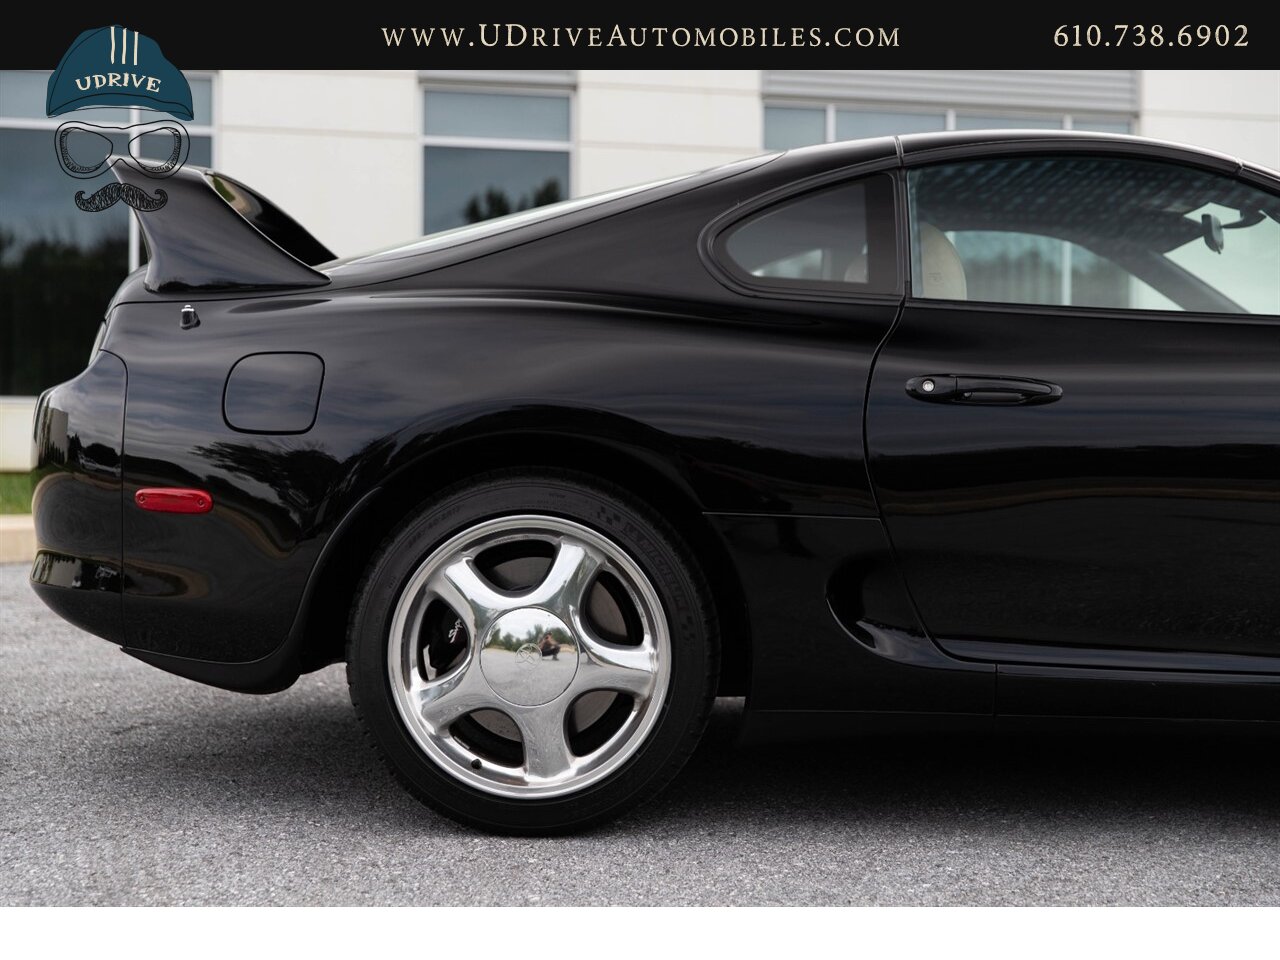 1997 Toyota Supra Turbo 6 Speed Manual 15th Anniversary Edition   - Photo 20 - West Chester, PA 19382